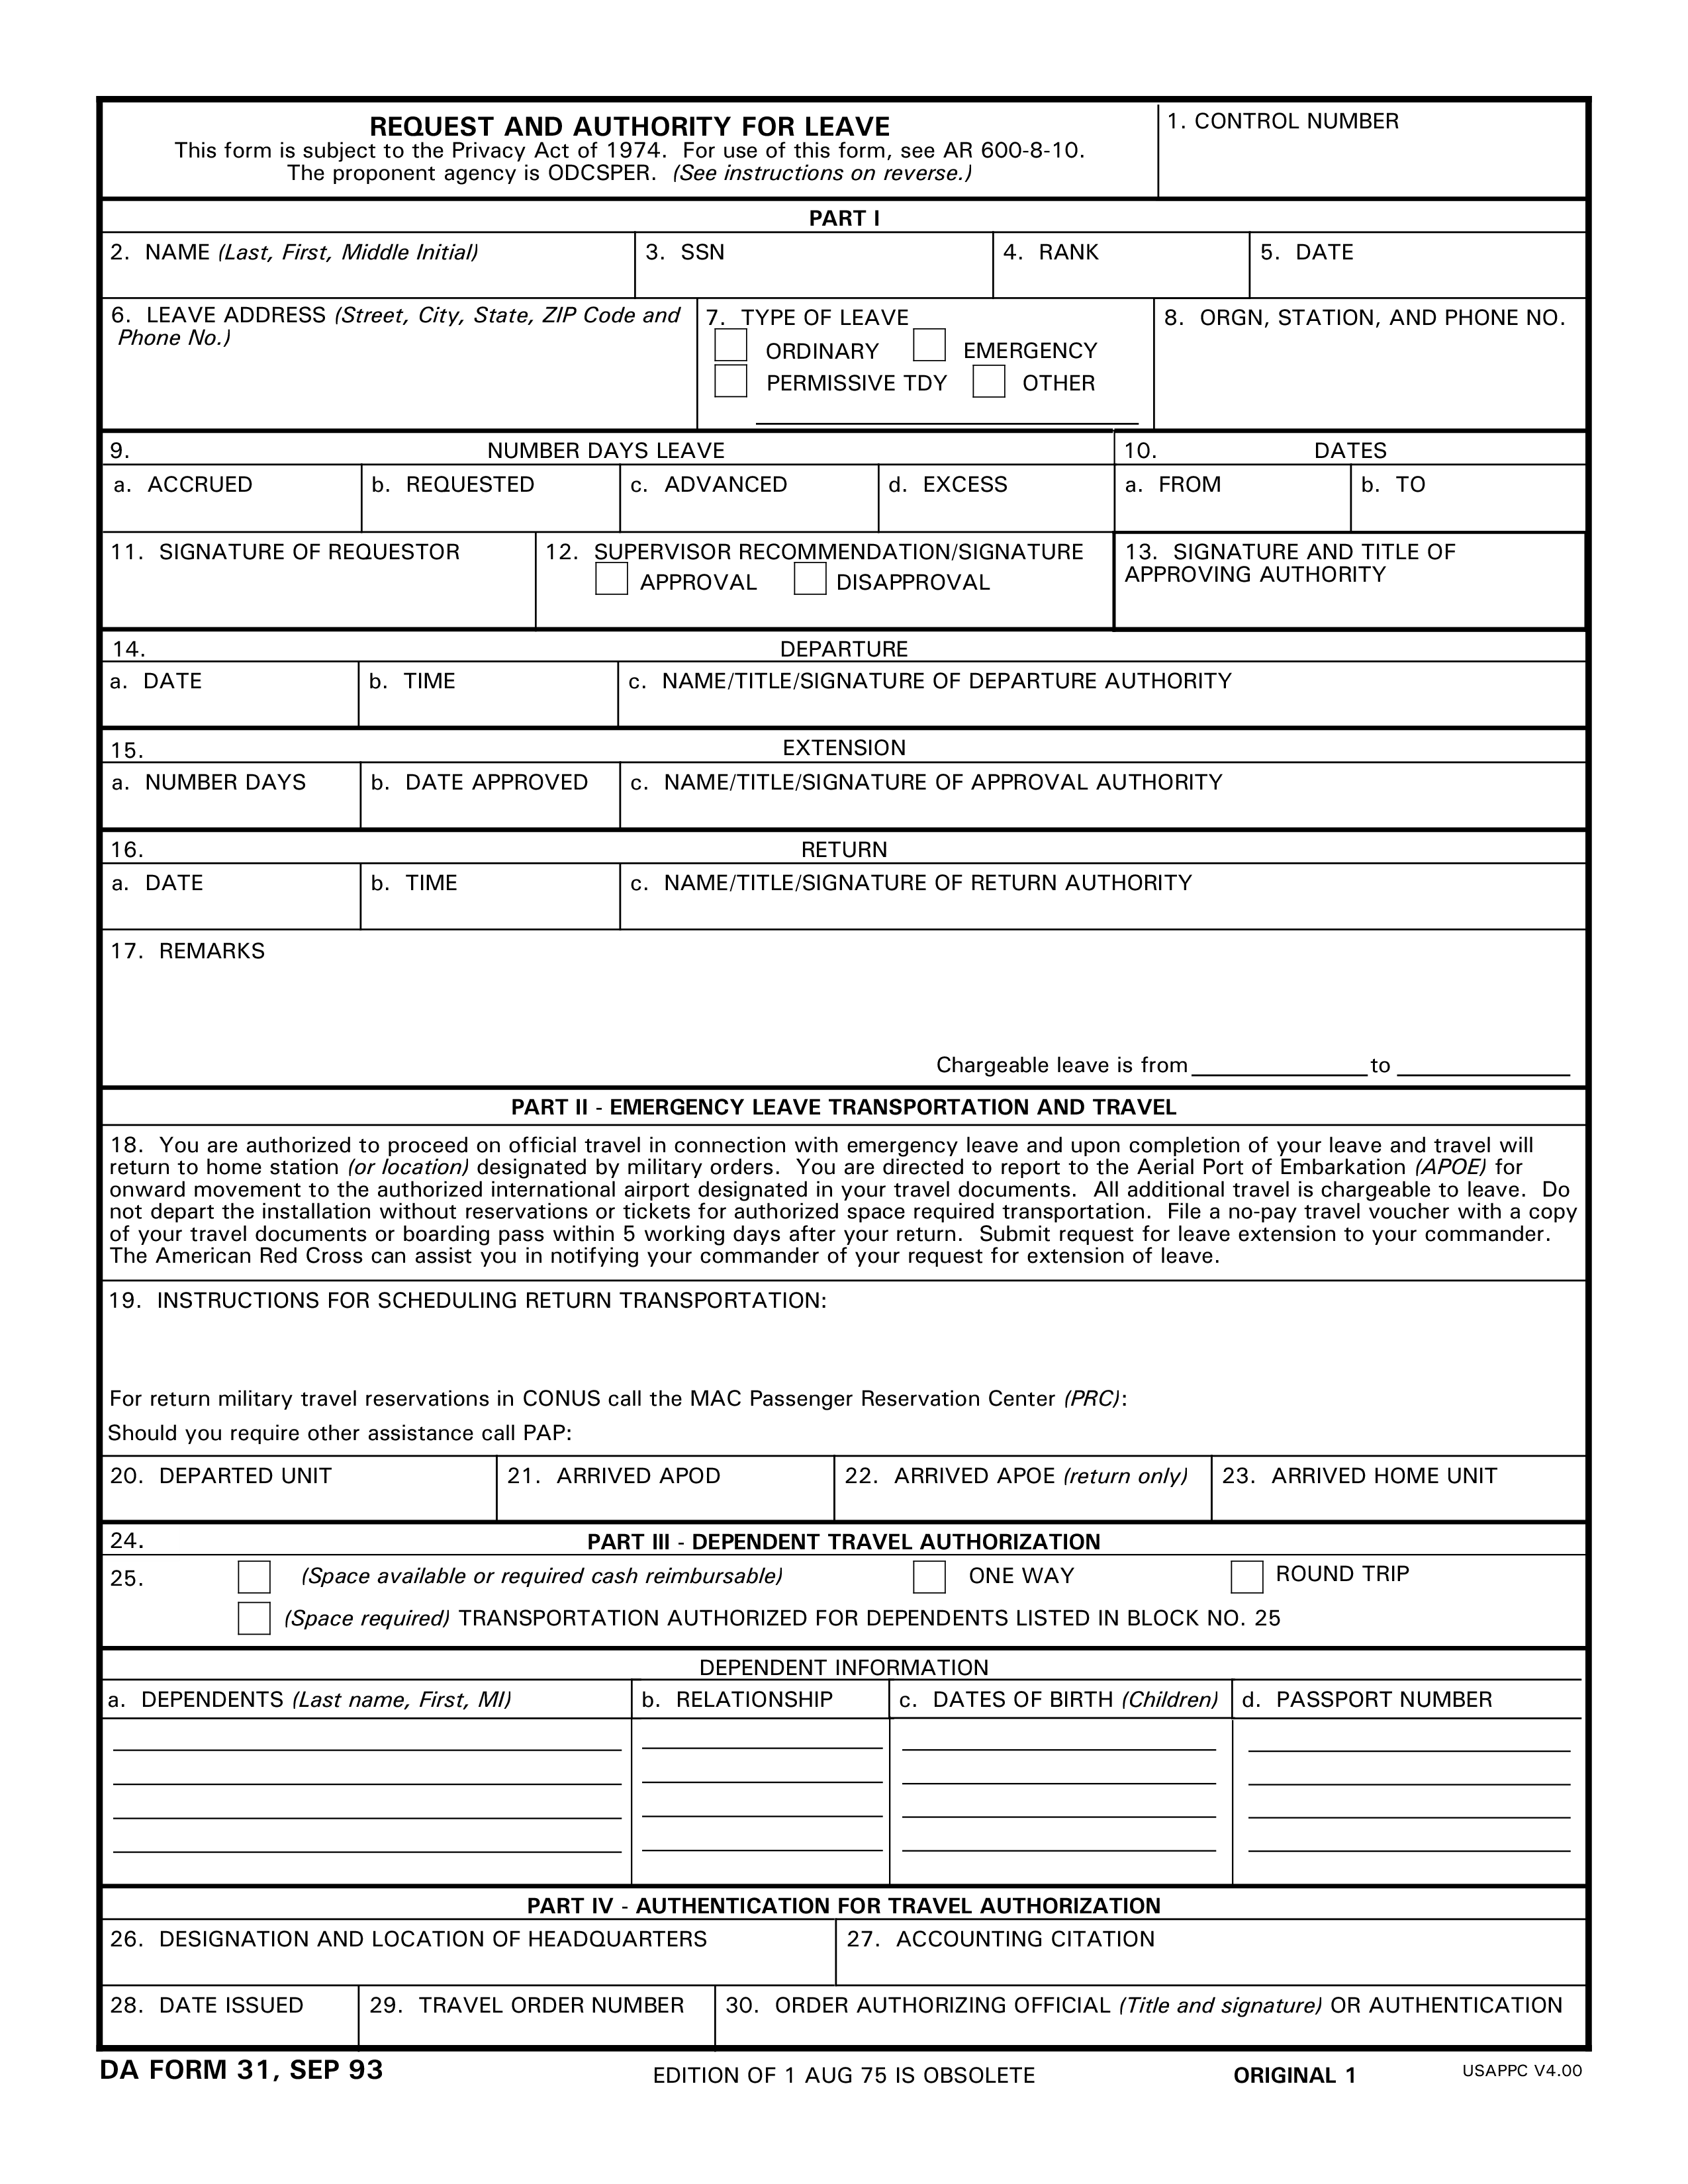 Request and Authority For Leave form template 模板